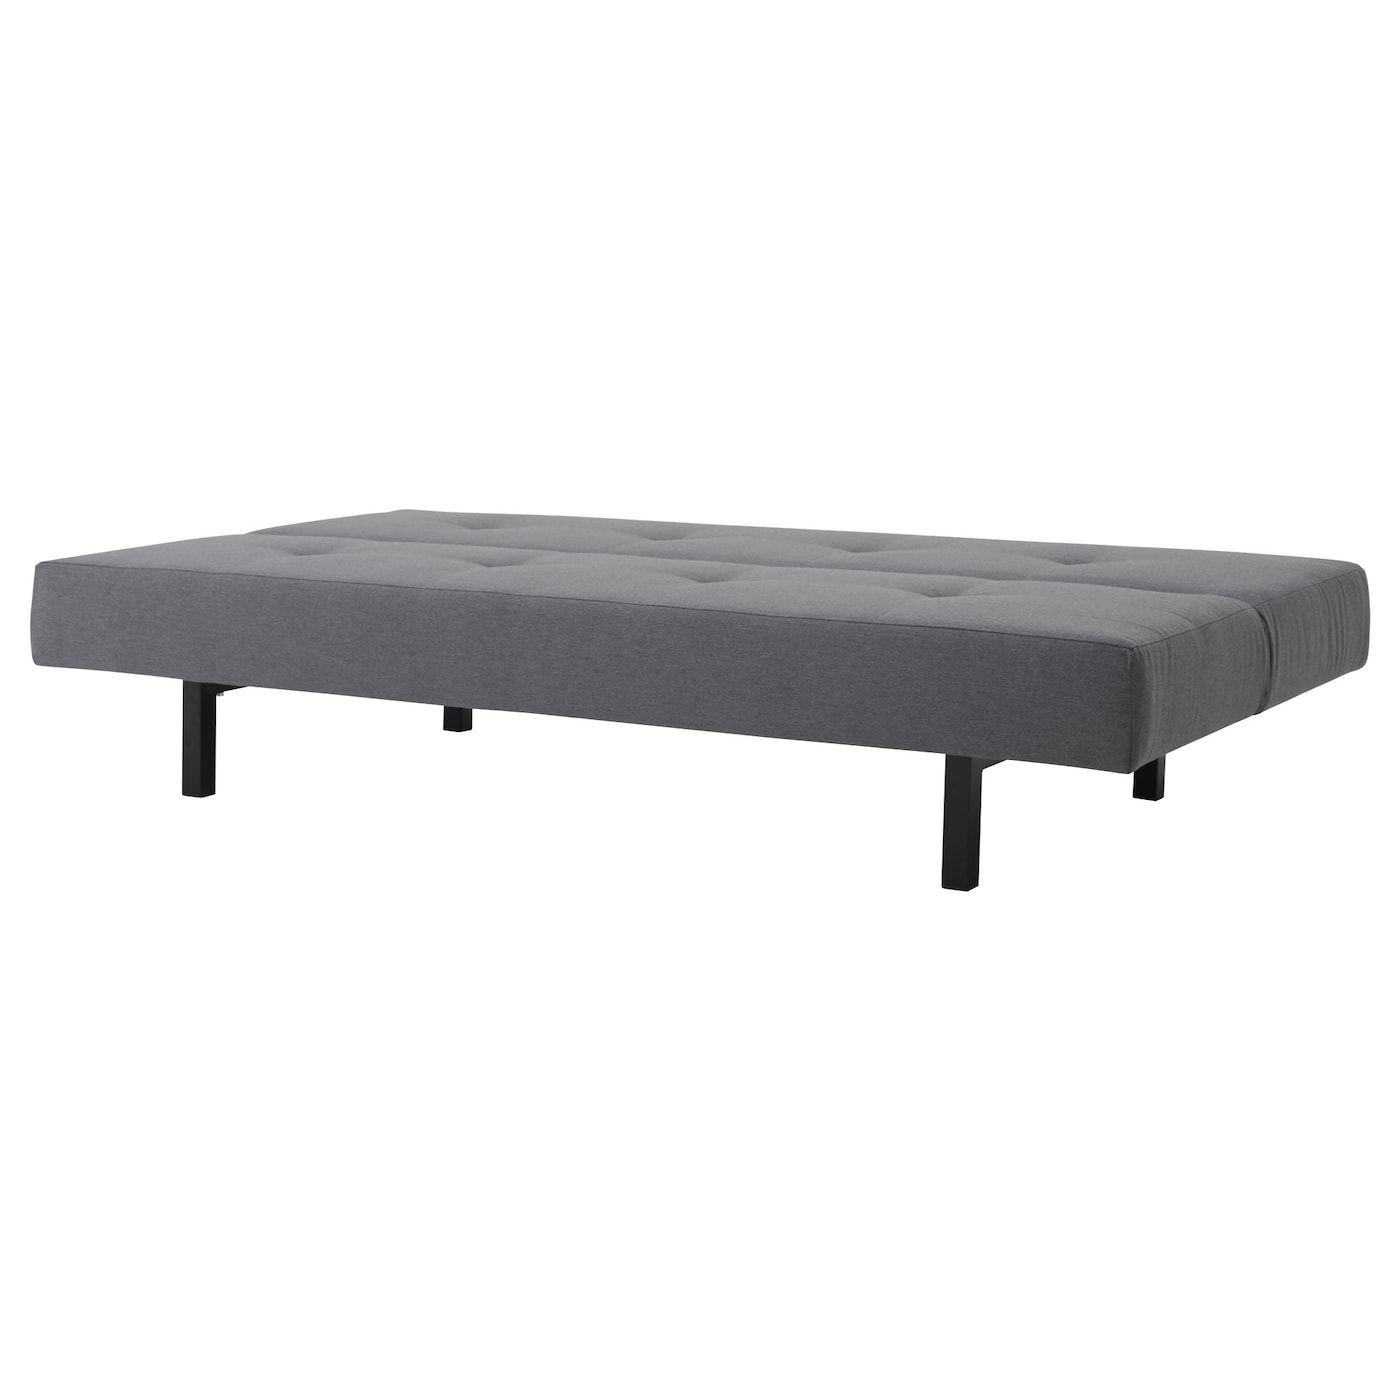 Grey fold down sofa bed from IKEA